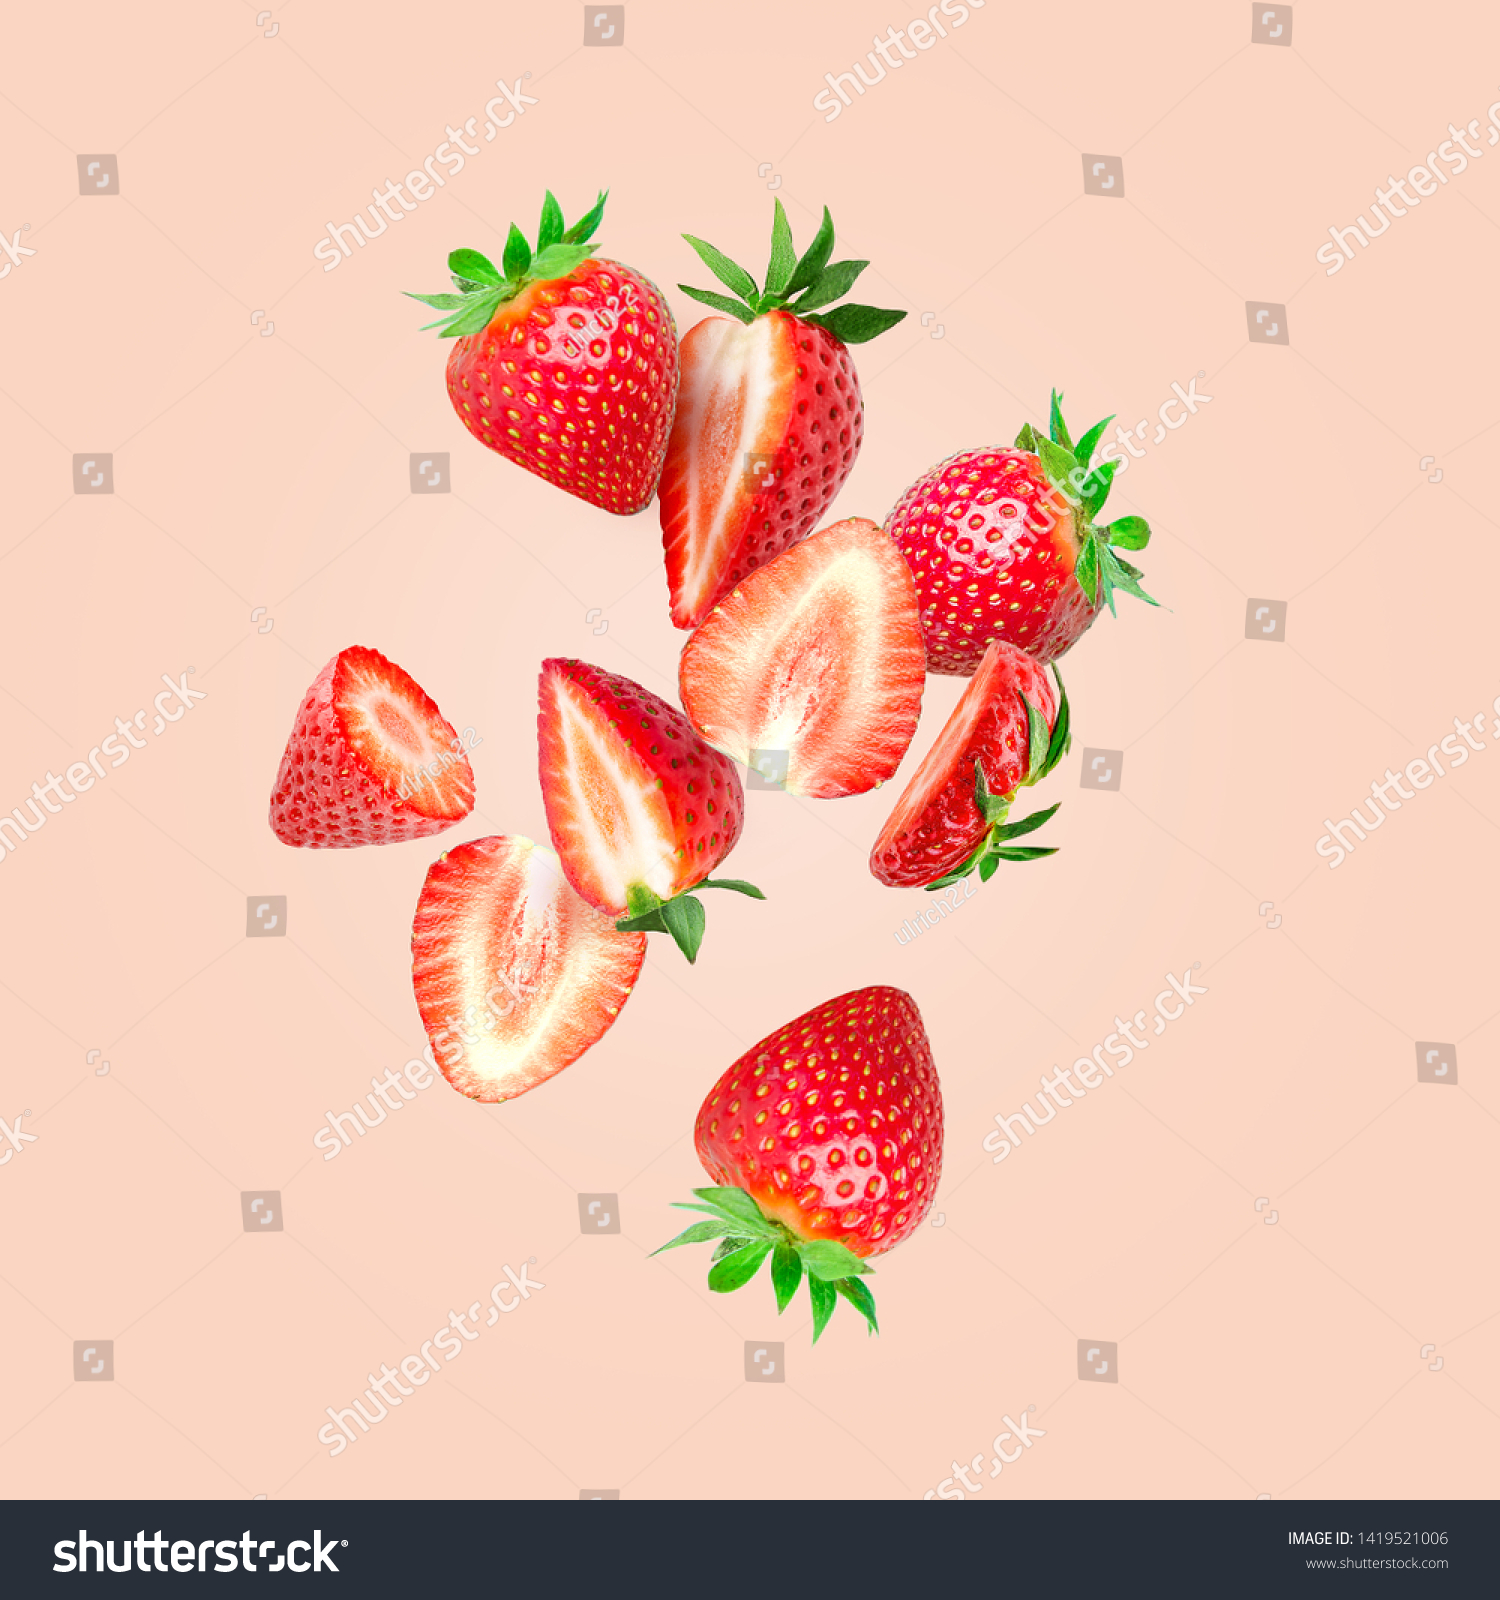 The composition of strawberries on a colored background. Cut strawberries into pieces with copy space. Fresh natural strawberry isolated. Strawberry slices flying in the air #1419521006